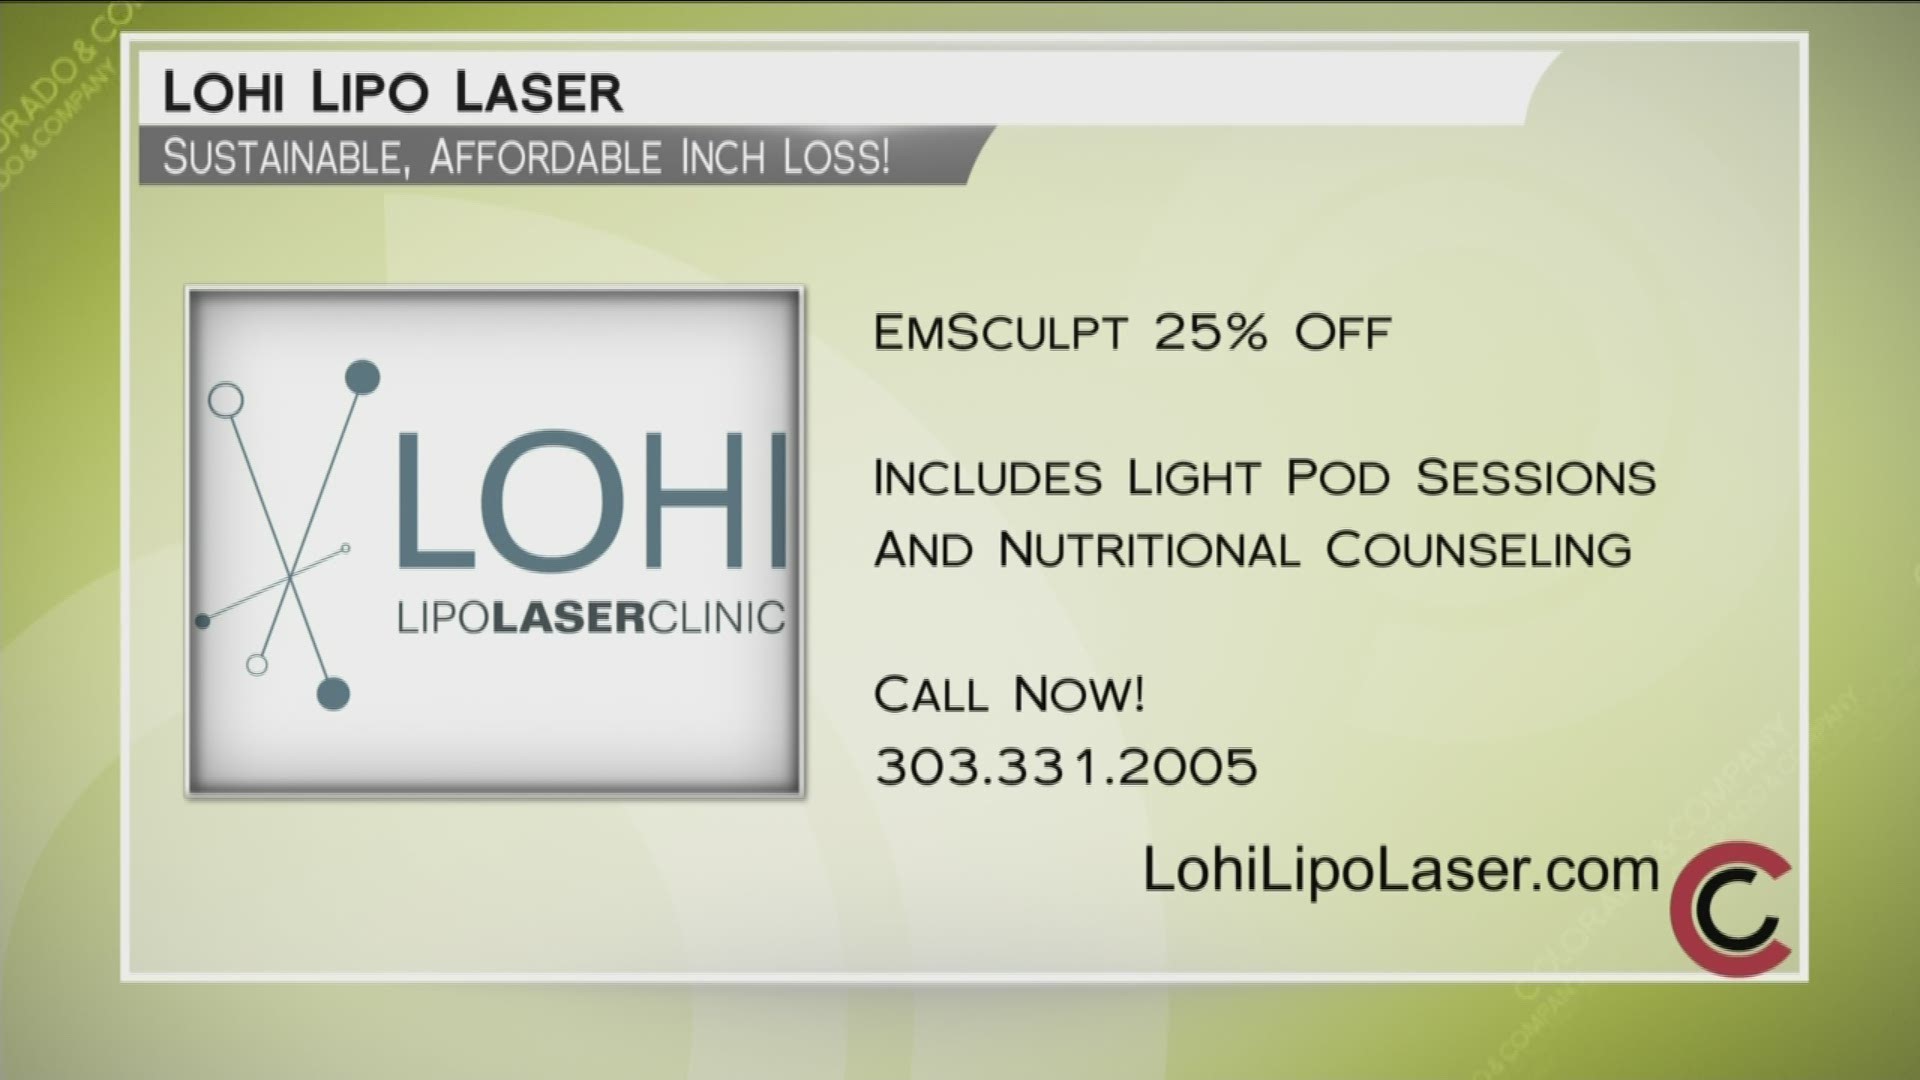 Call 303.331.2005 or visit LohiLipoLaser.com to find out if Nick and his team can help you. You can also learn about today's specials, like Emsculpt for 25% off!